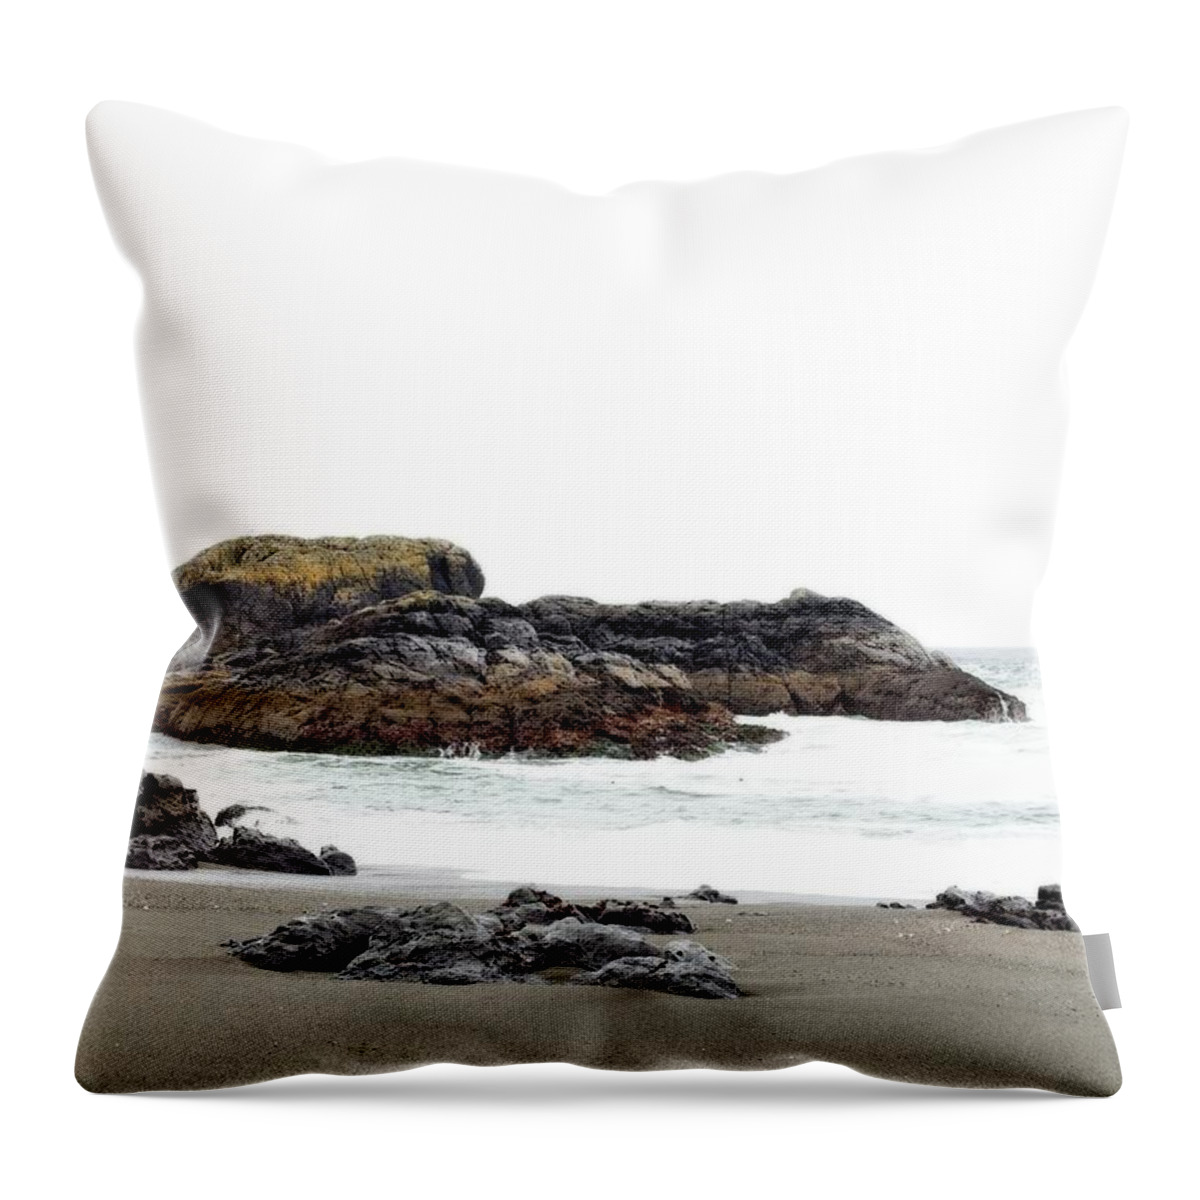 Landscape Throw Pillow featuring the photograph Sea Sand and Rocks by Allan Van Gasbeck